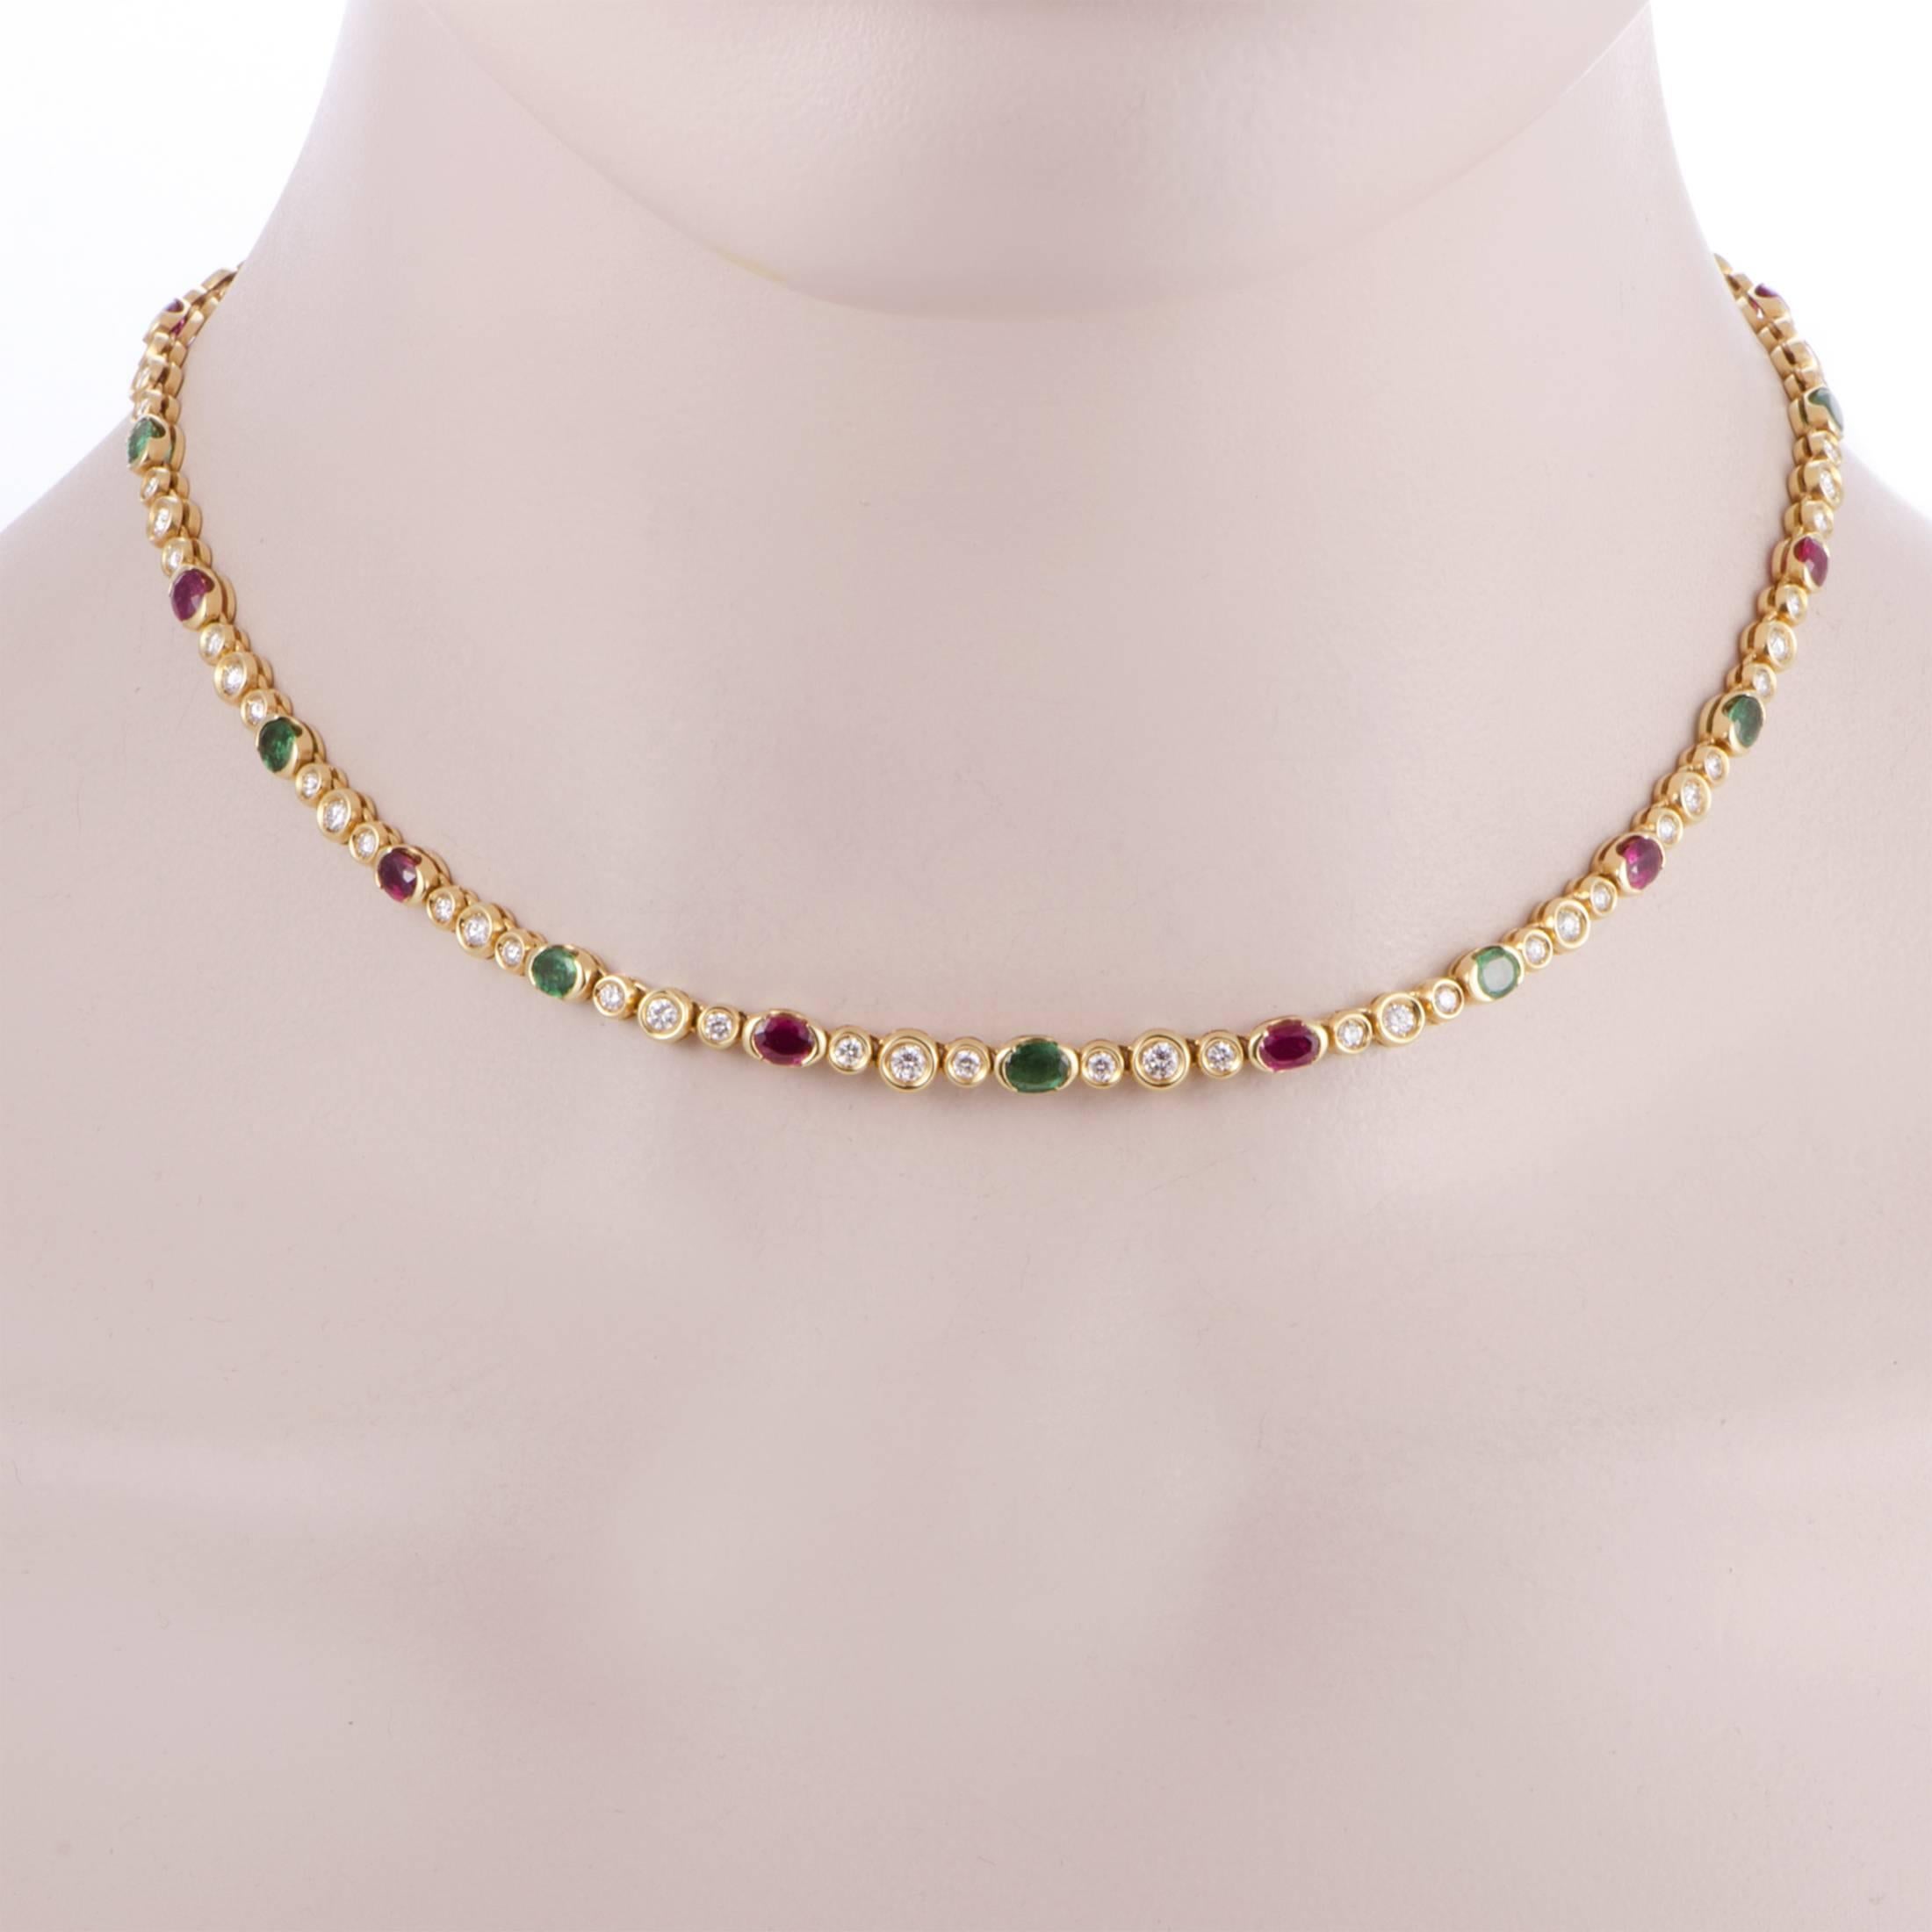 Neat and scintillating, the charming arrangement of diamonds amounting to 2.75 carats is interspersed with precious emeralds weighing in total 4.40 carats and fabulous rubies totaling 4.00 carats in this elegant 18K yellow gold necklace from Fred of